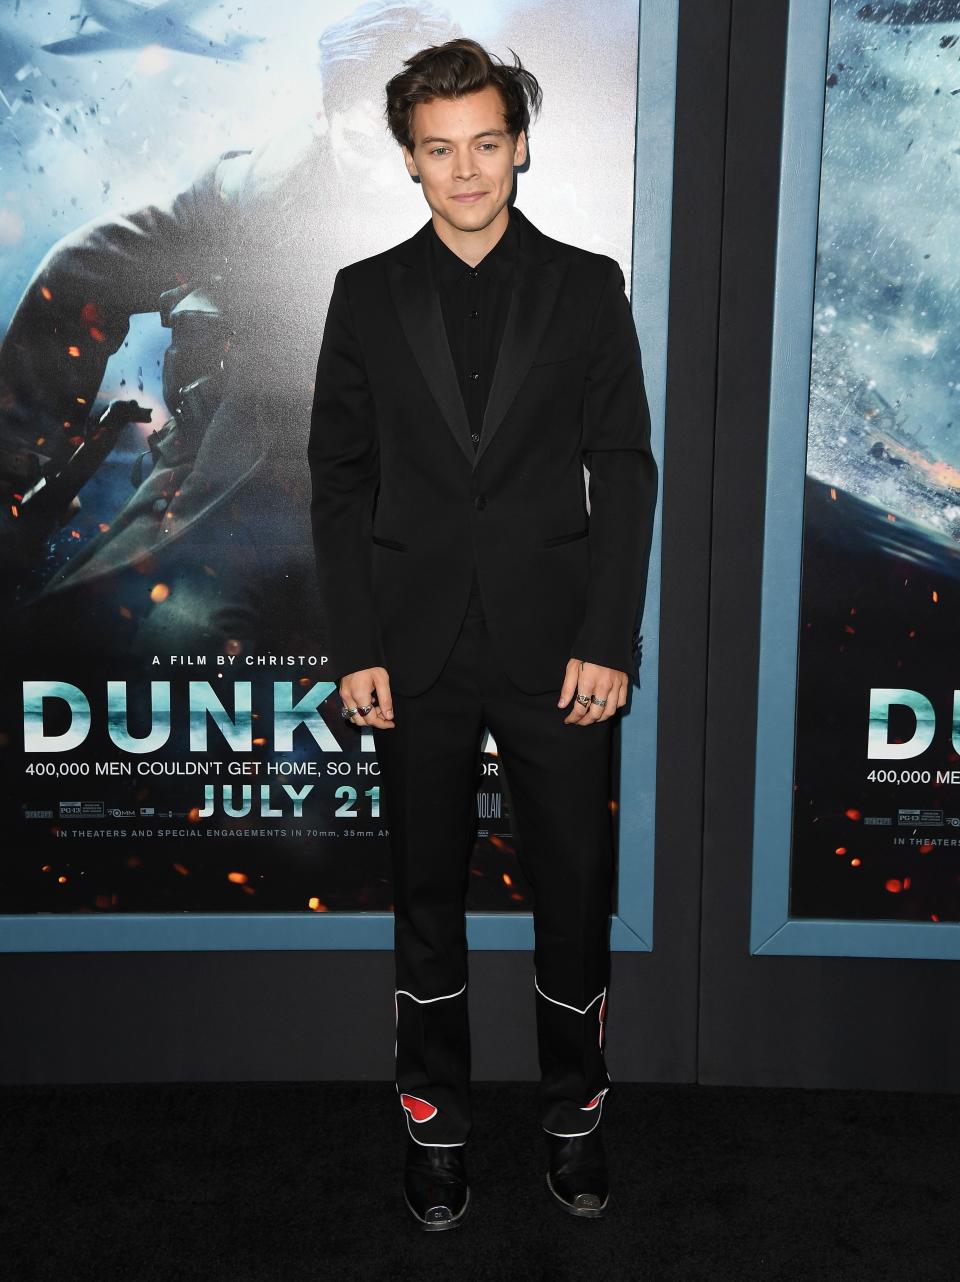 Harry Styles gave all-black an insider spin wearing hot-off-the-presses Calvin Klein to the New York premiere of "Dunkirk" last night.